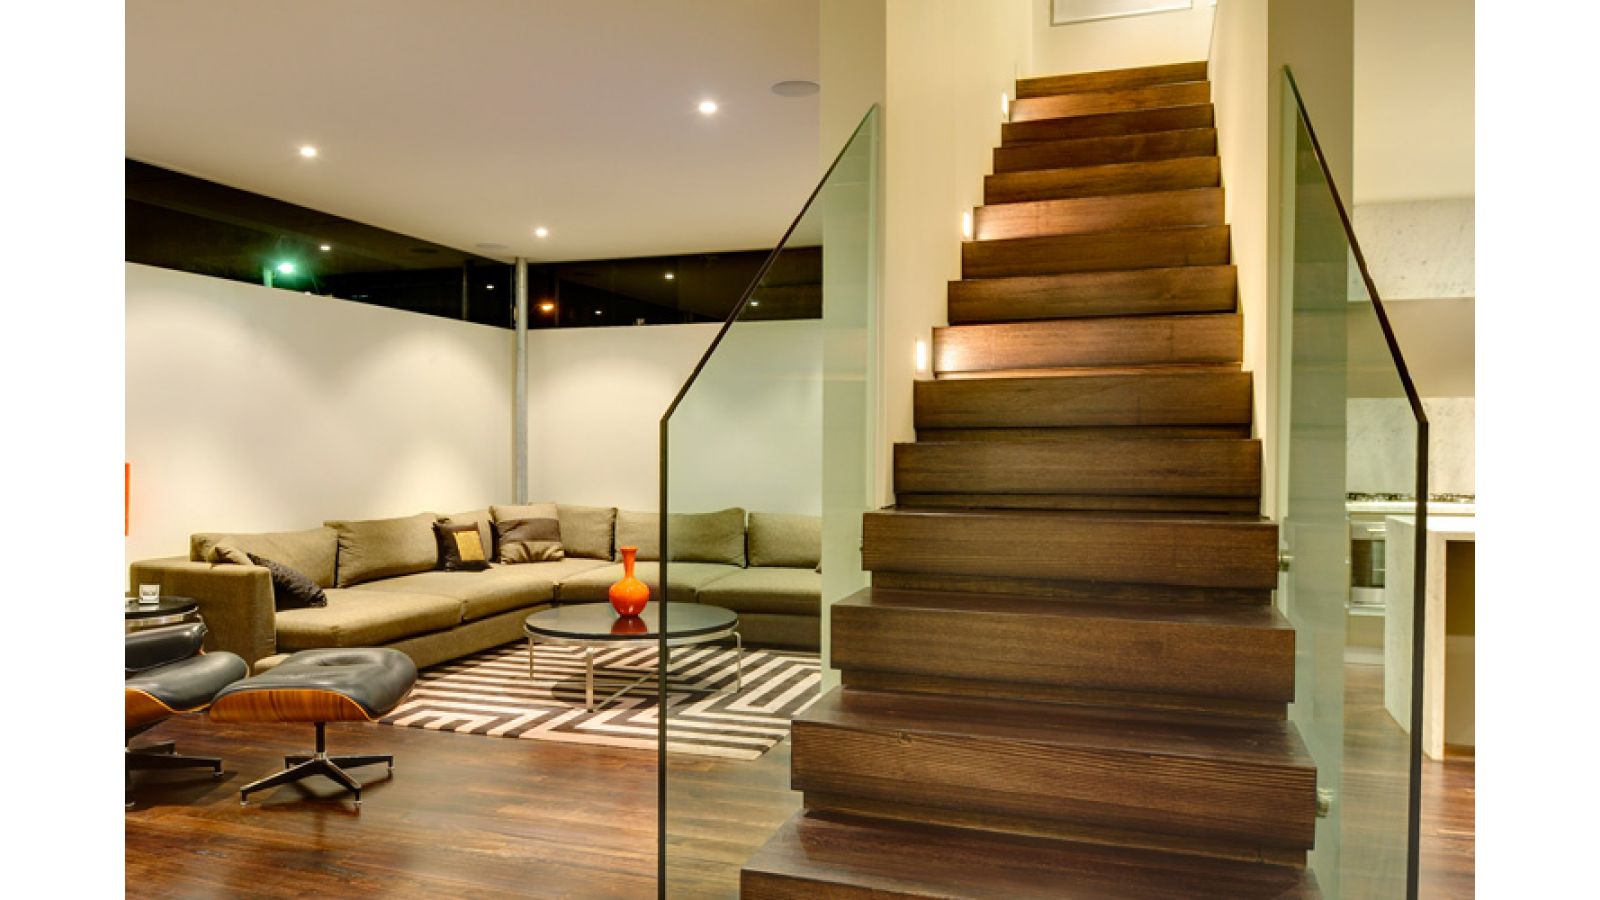 FEATURE STAIRS